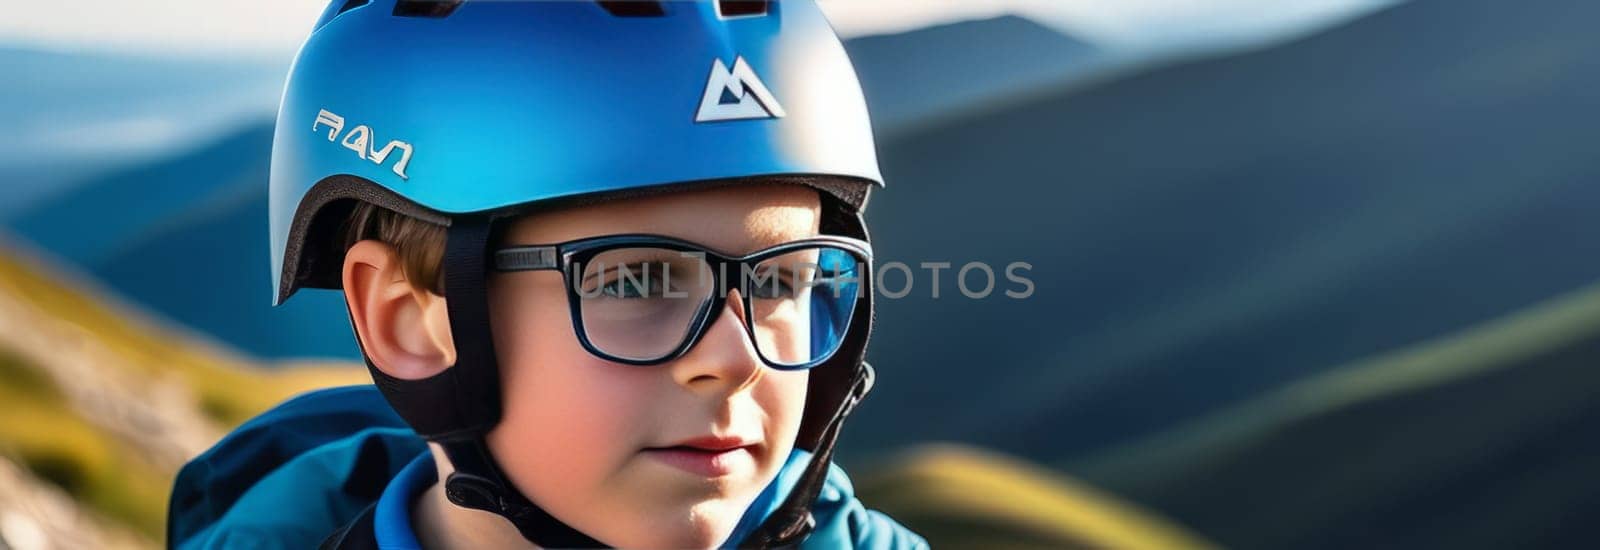 Young boy wearing helmet and glasses stands confidently before towering mountain backdrop ready for adventure and exploration. He may be gearing up for bicycle ride or some other outdoor activity